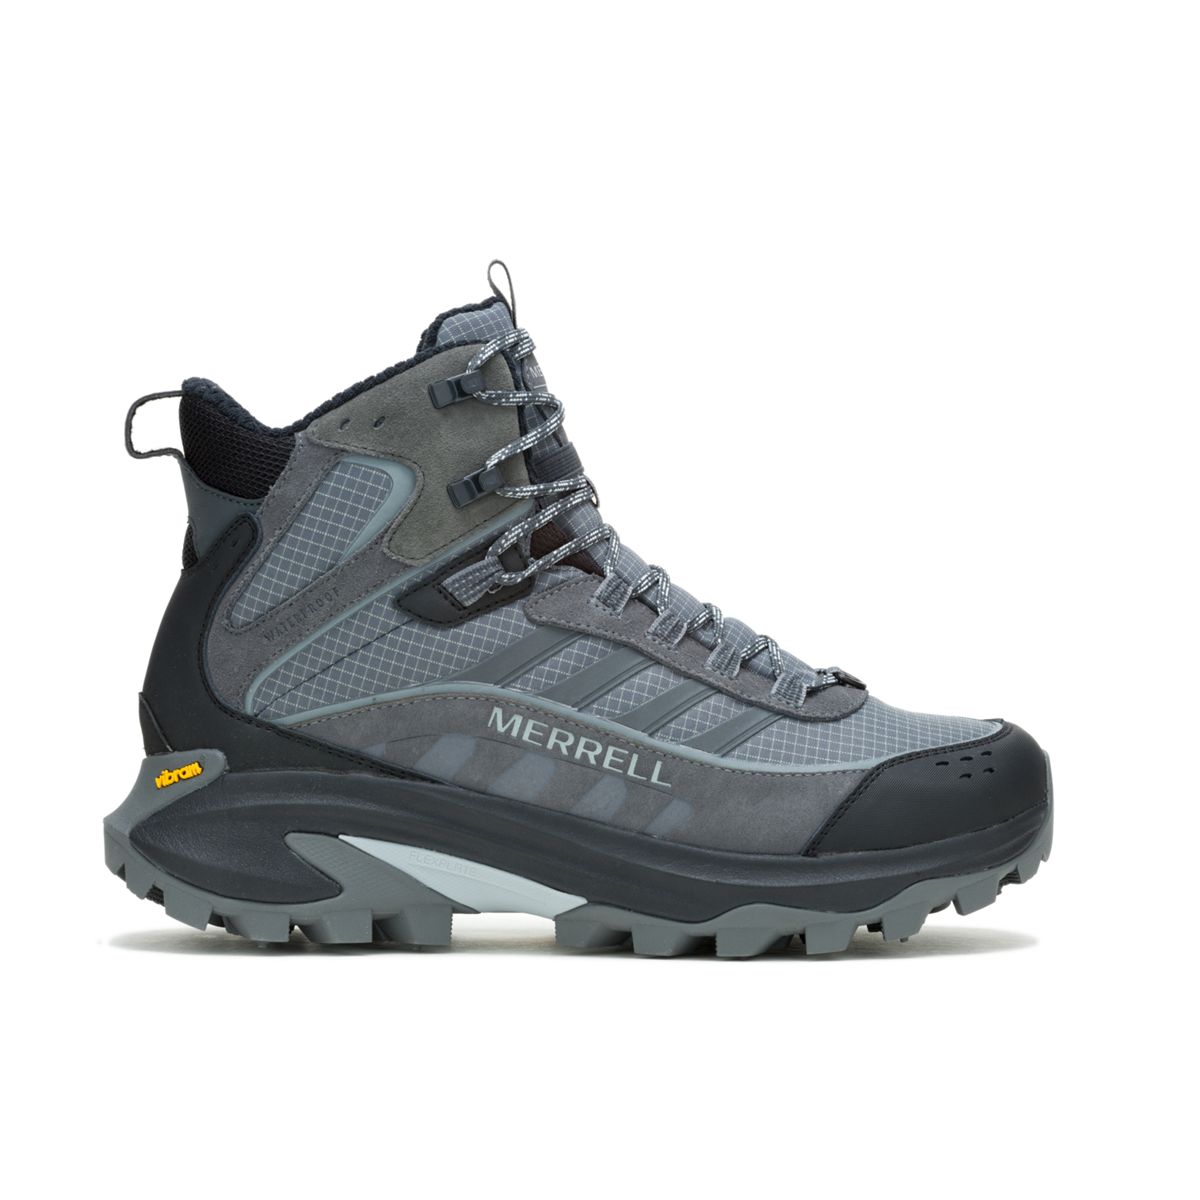 Moab Speed 2 Thermo Mid Waterproof, Rock, dynamic